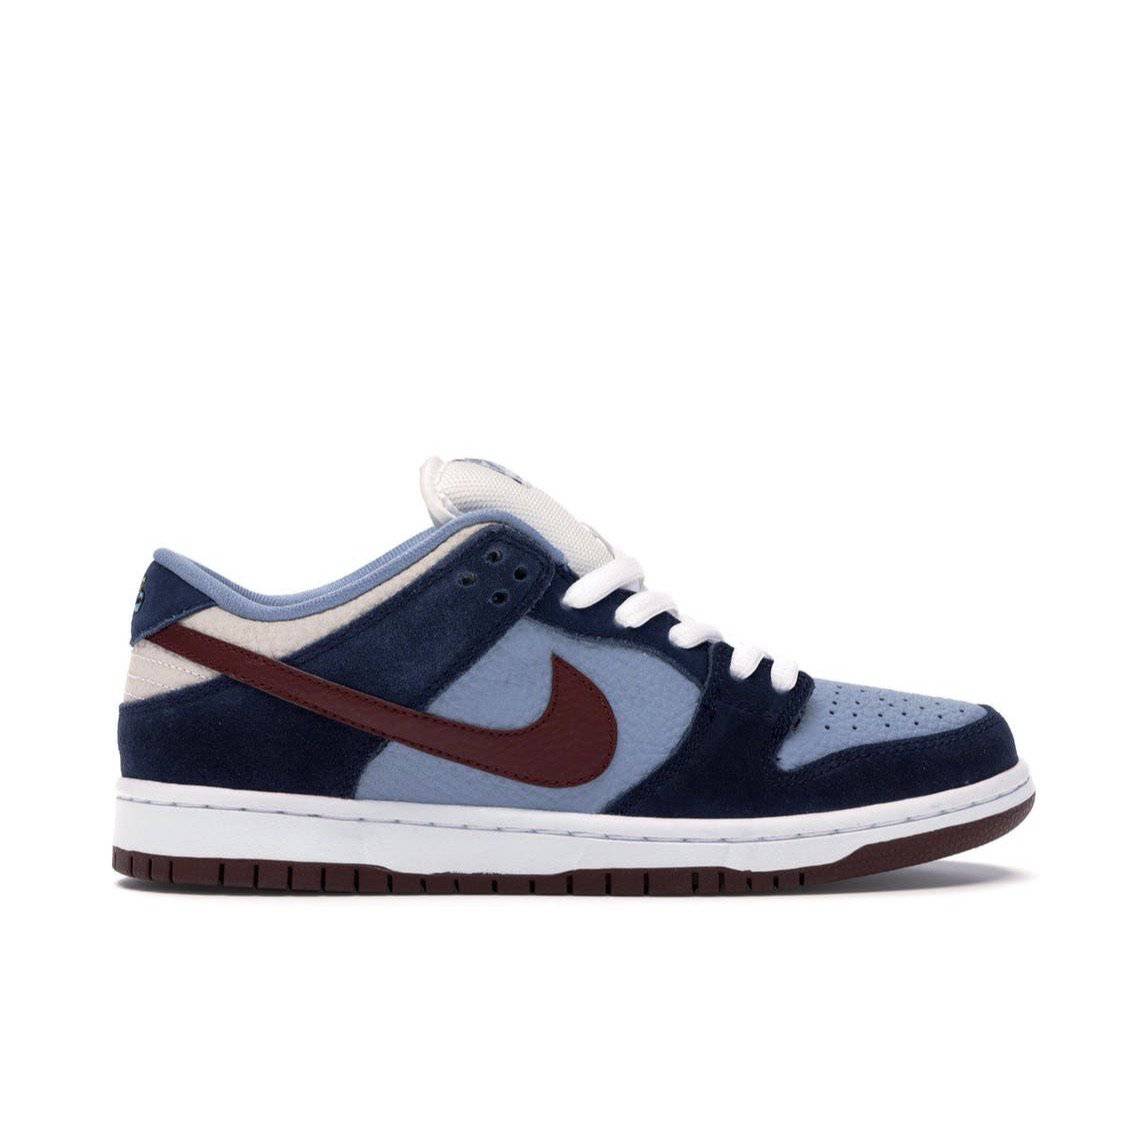 Nike Dunk SB Low “FTC Finally” | Request